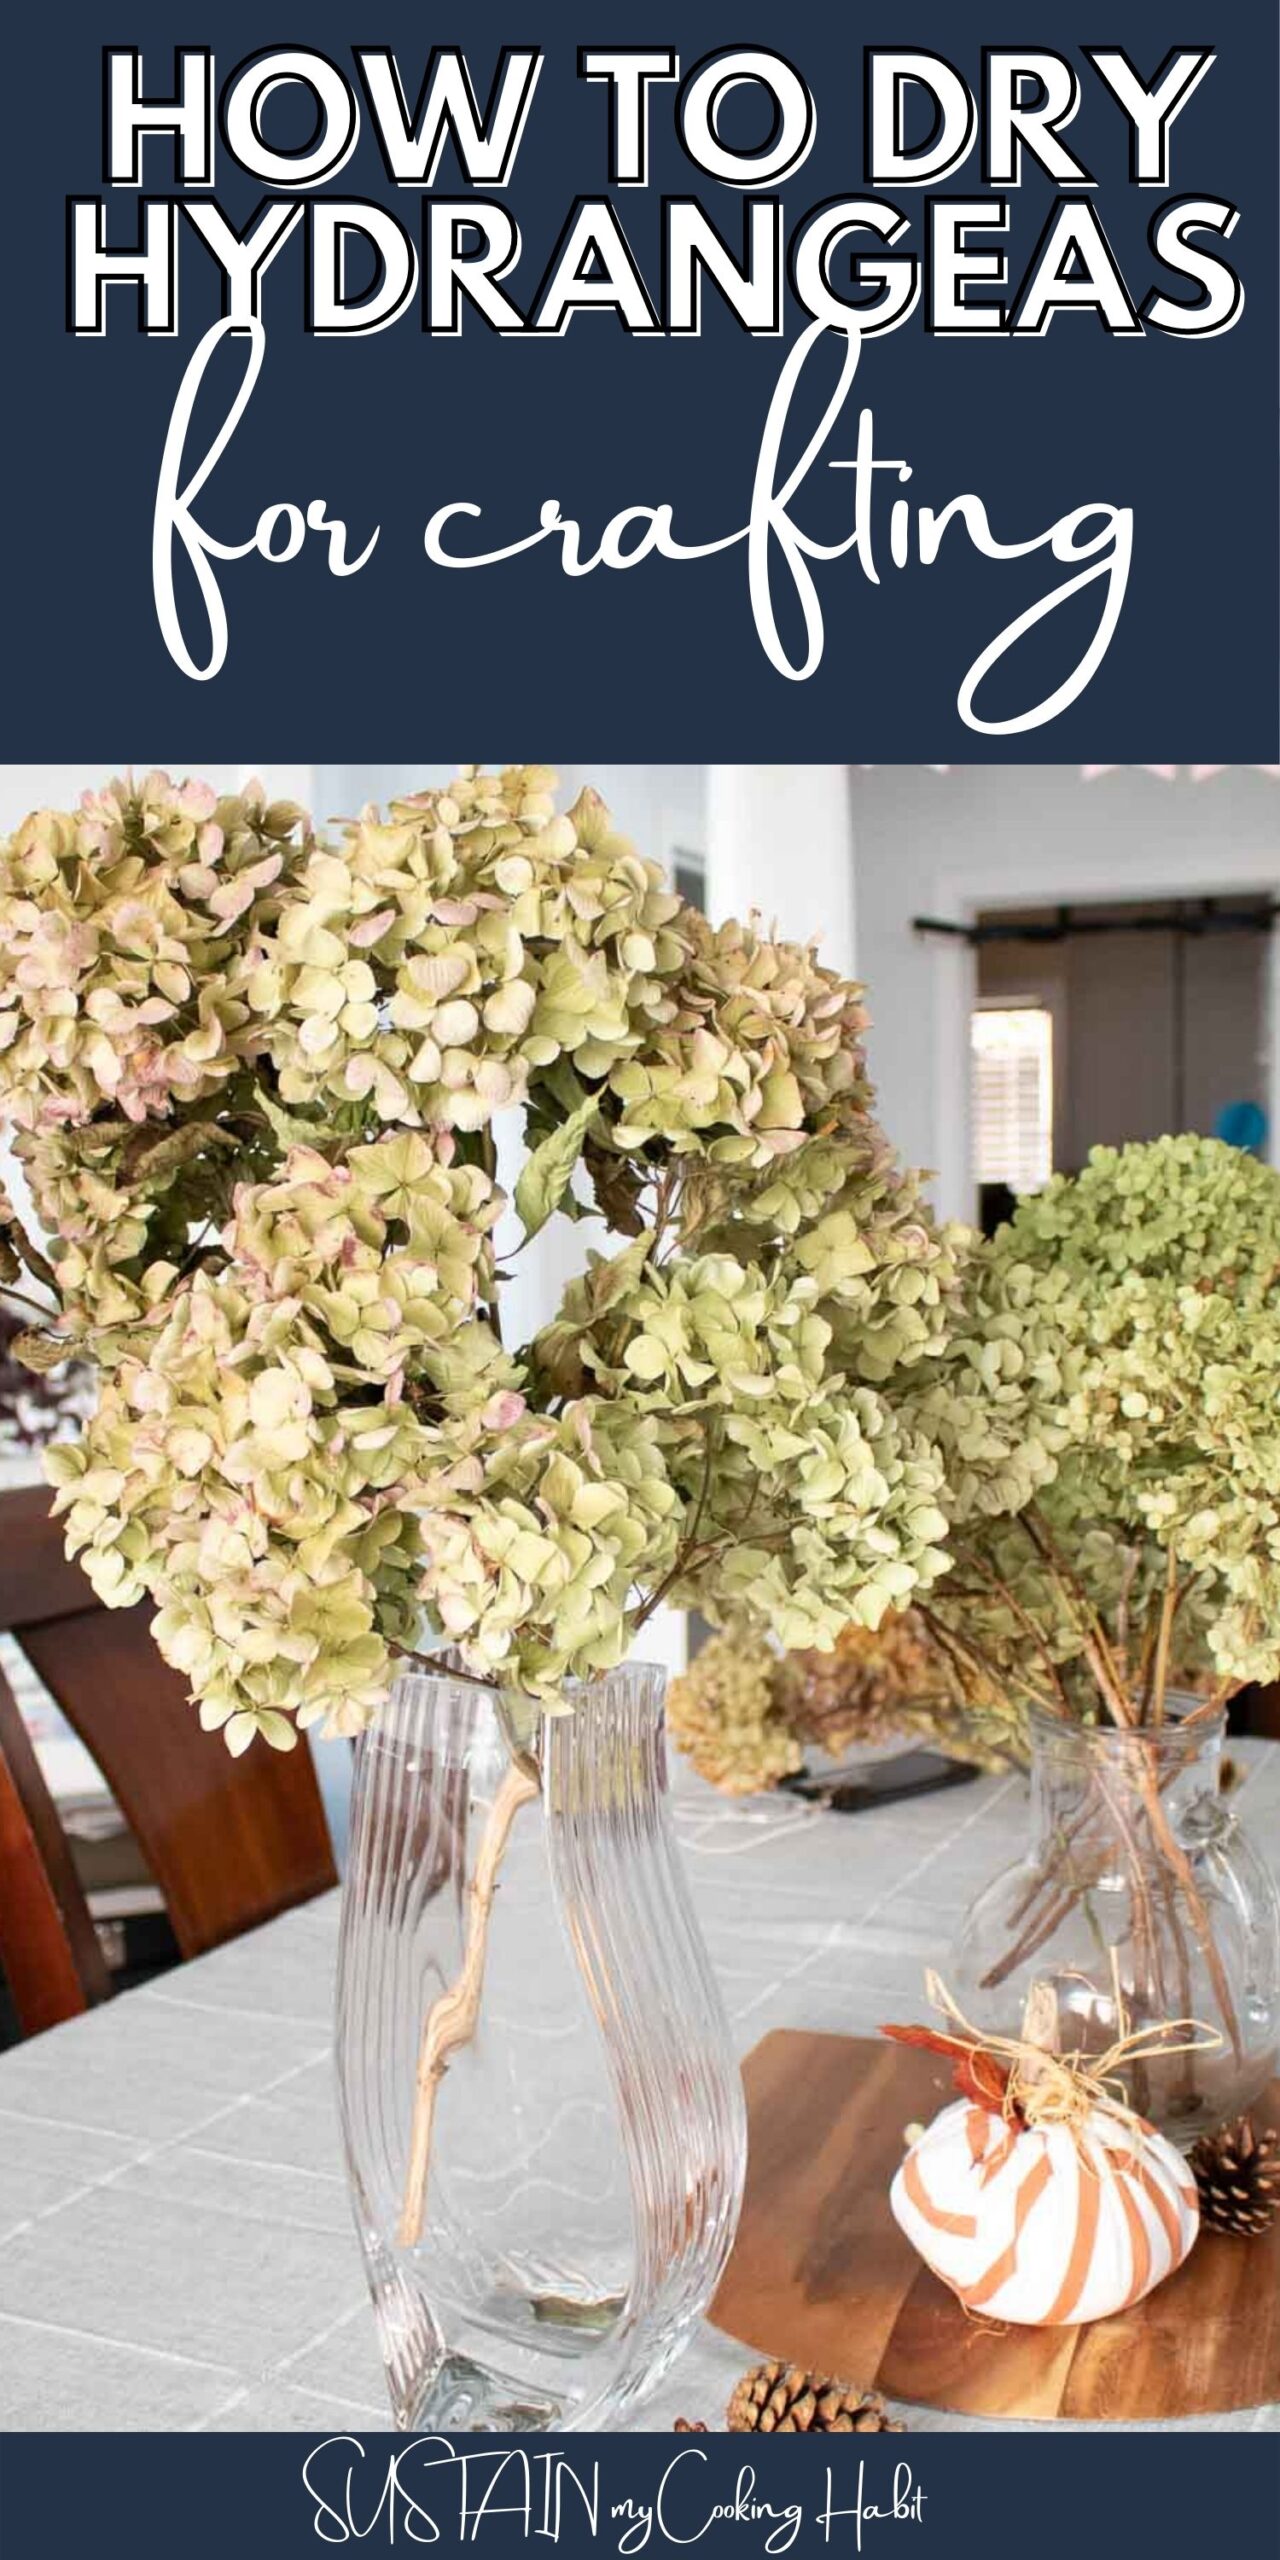 Dried hydrangeas a vase with text overlay.